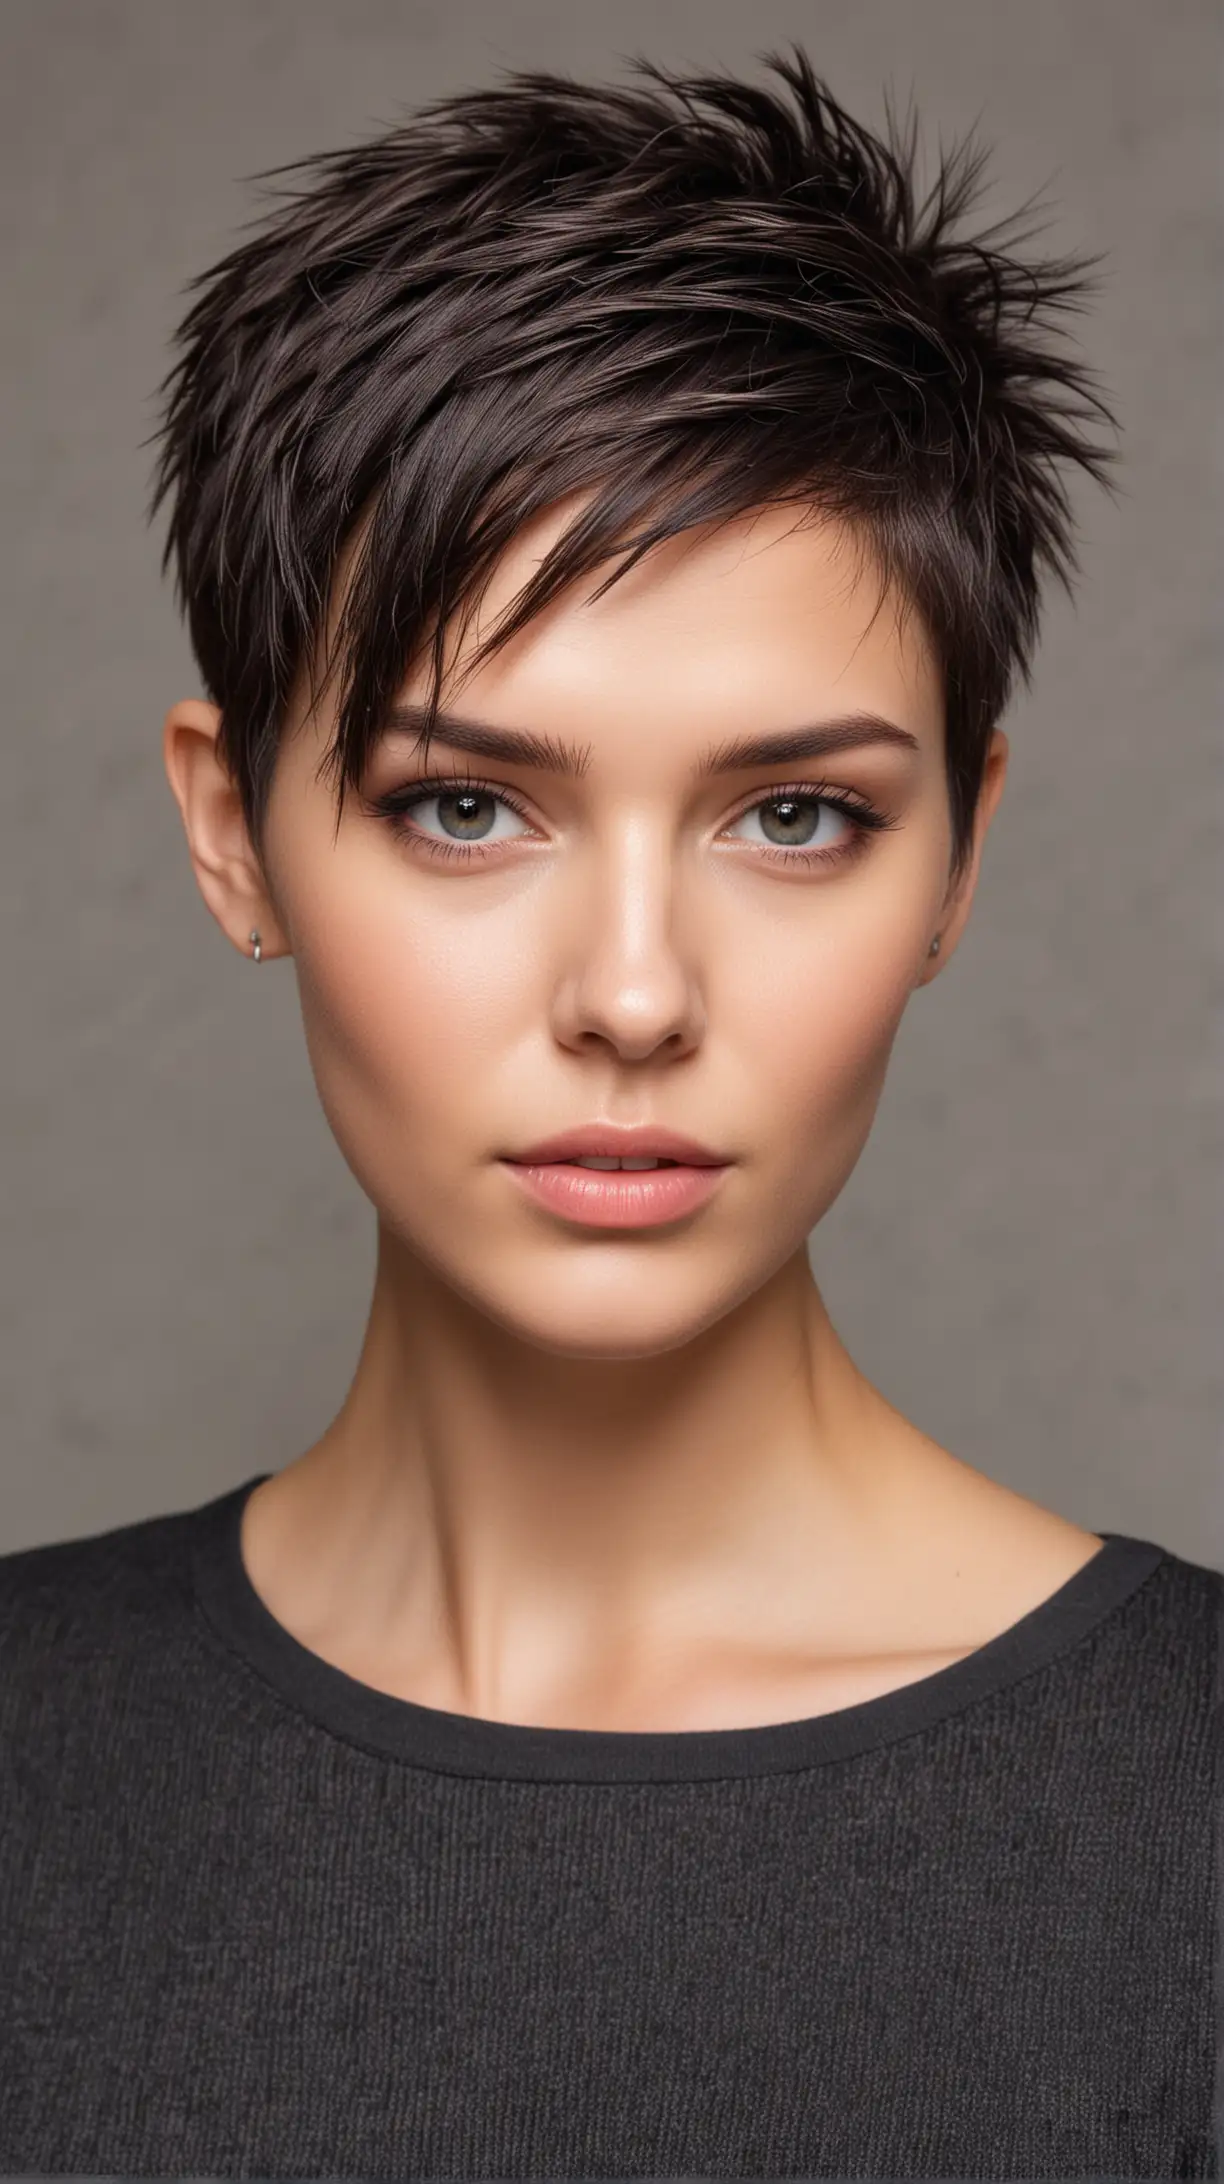 Edgy Top Crop Hairstyle for 30YearOld Woman with Fine Hair